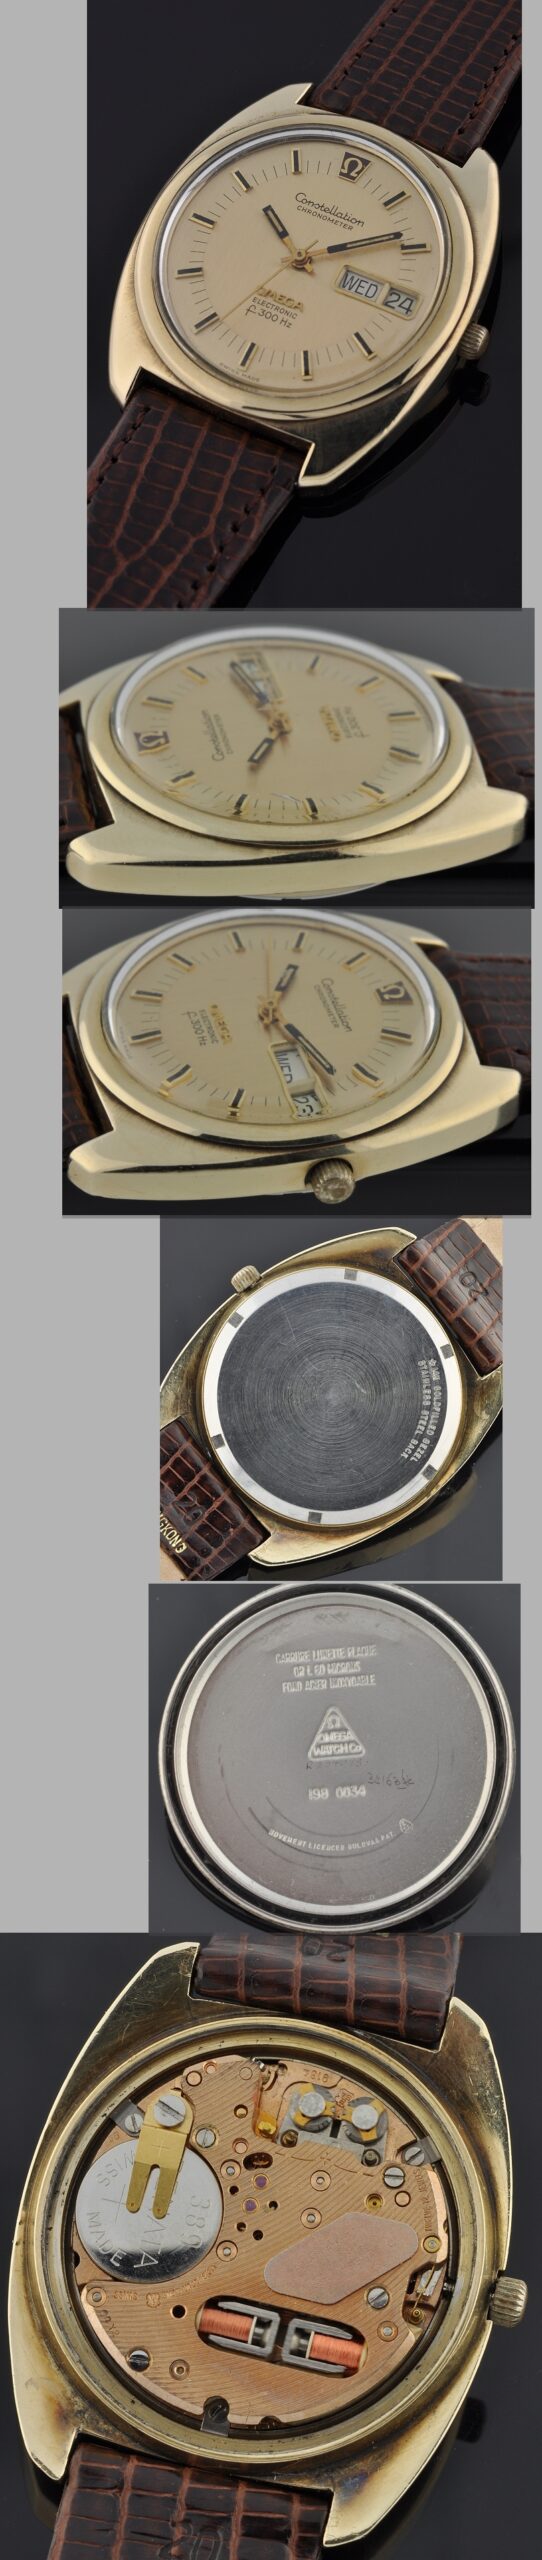 Omega Constellation F300 gold-plated watch with original dial, day/date aperture, hands, enamel markers, and reliable electronic movement.